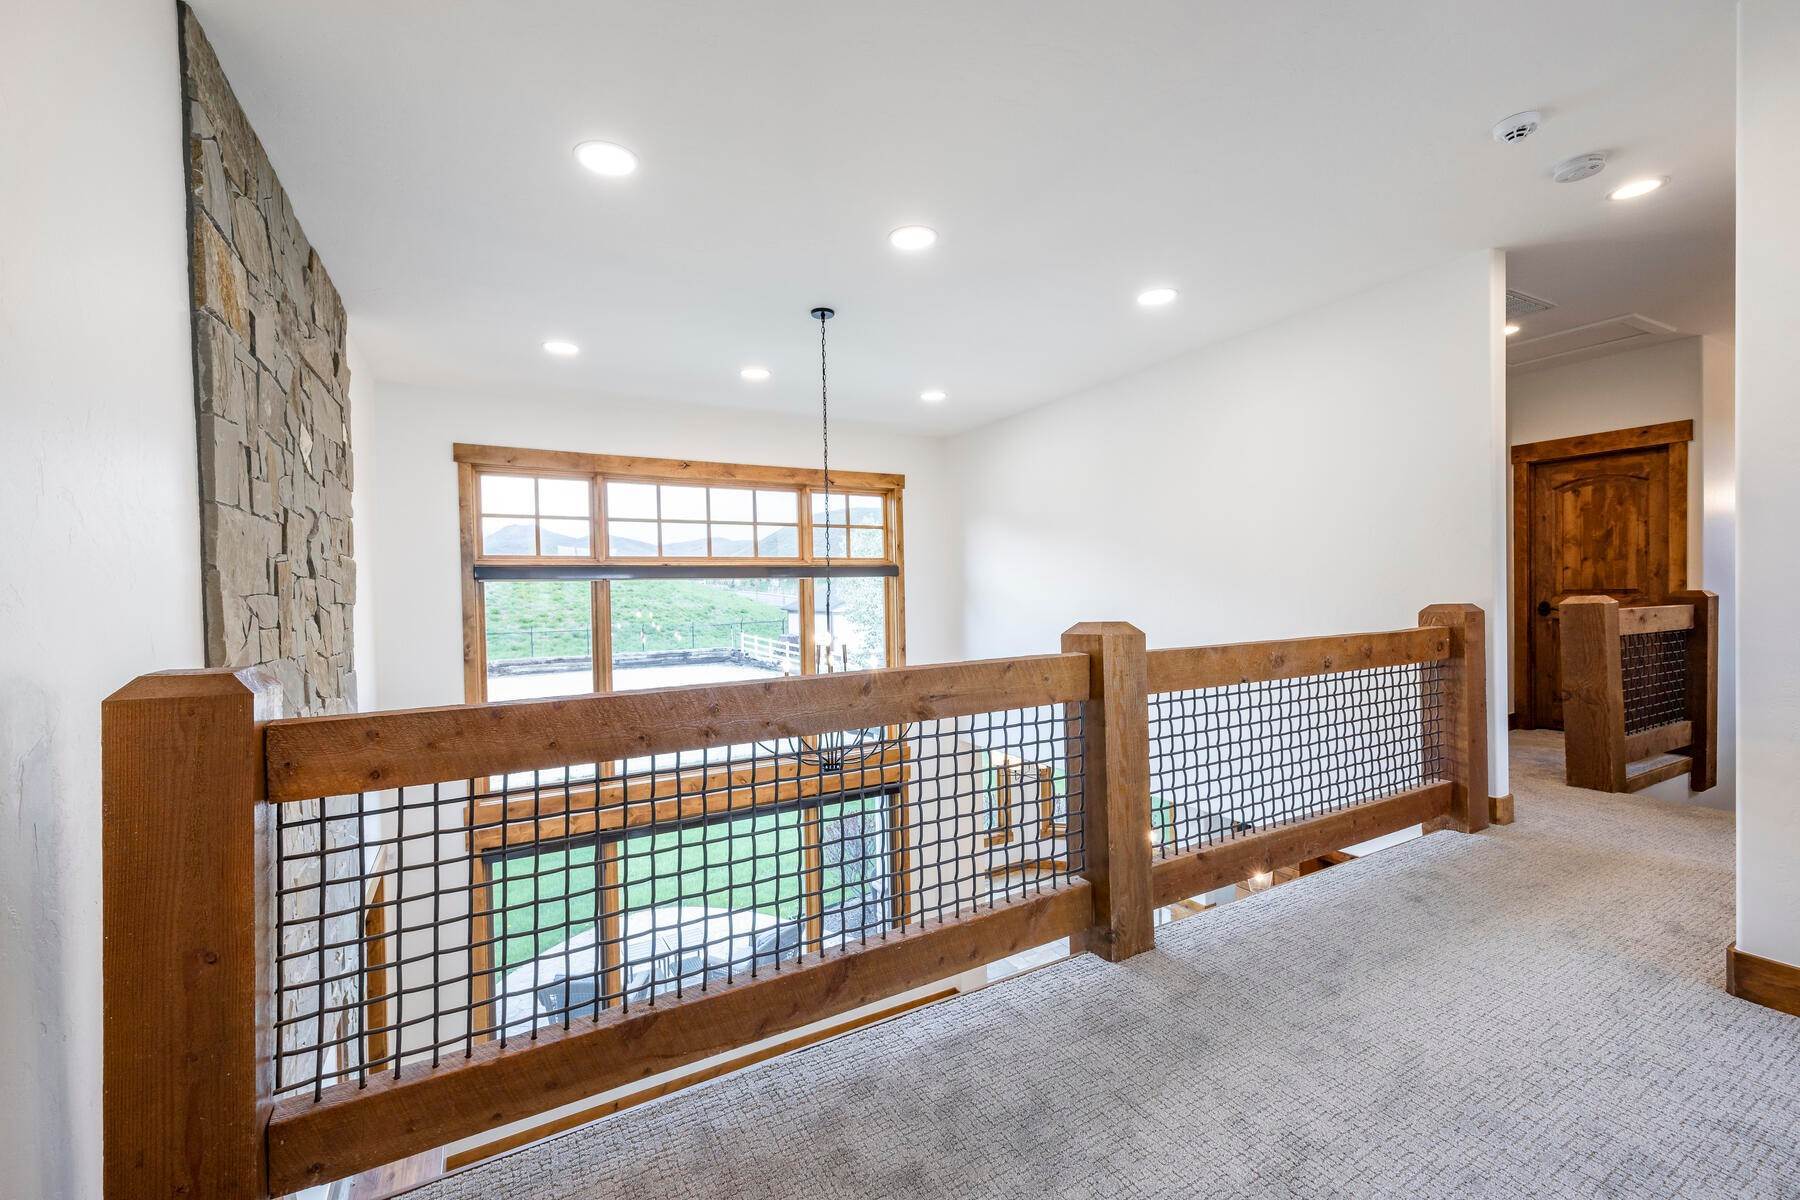 21. Single Family Homes for Sale at Professionally Designed 1-Acre Custom Equestrian Arena & Mountain Modern Home 745 E Dutch Valley Dr Midway, Utah 84049 United States